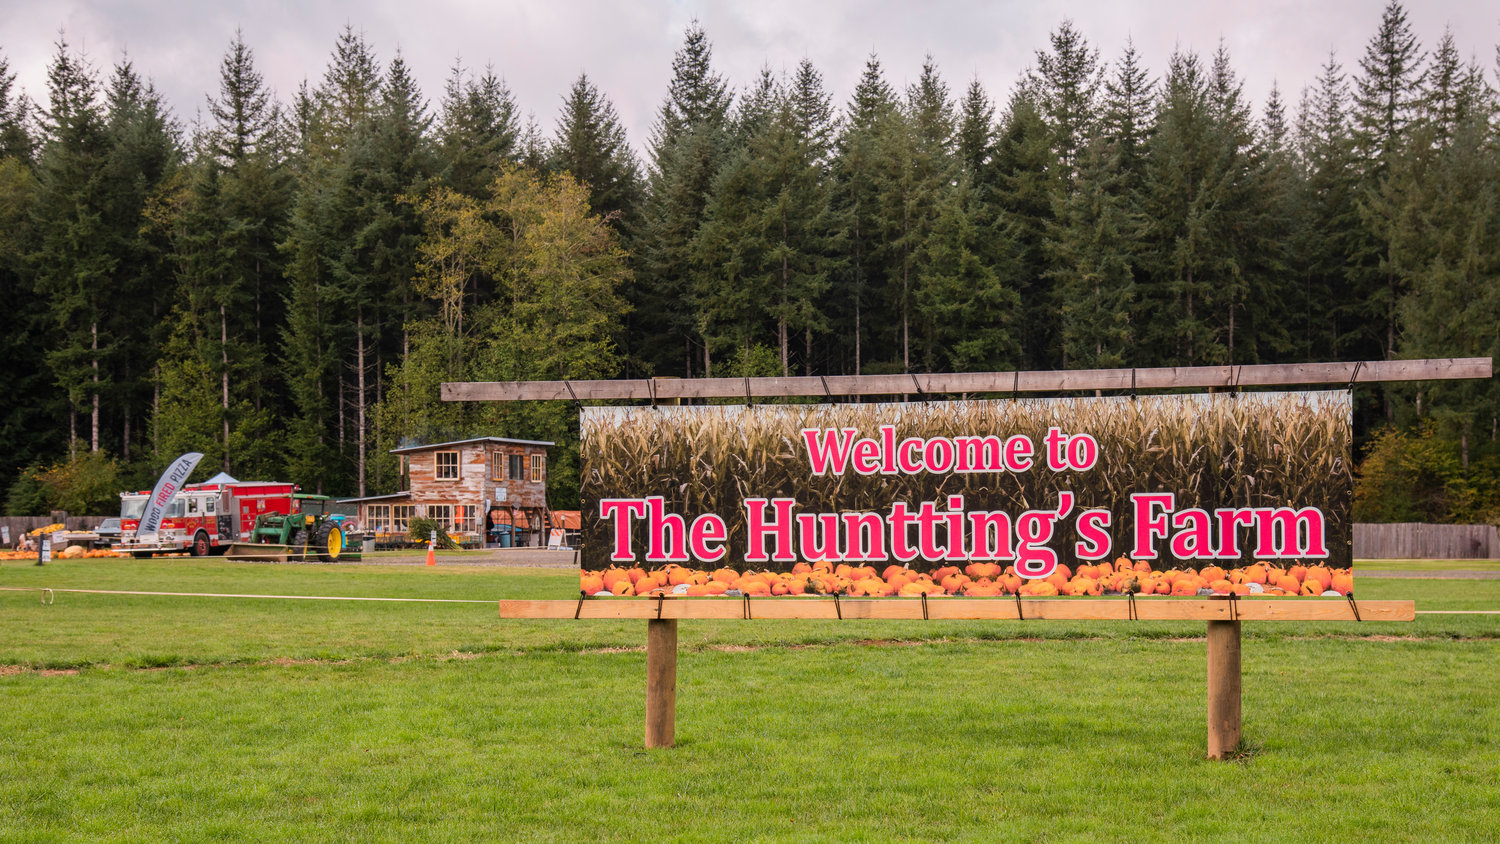 A sign welcomes visitors to The Huntting’s Farm which includes a pumpkin patch and haunted forest seen Wednesday in Cinebar.